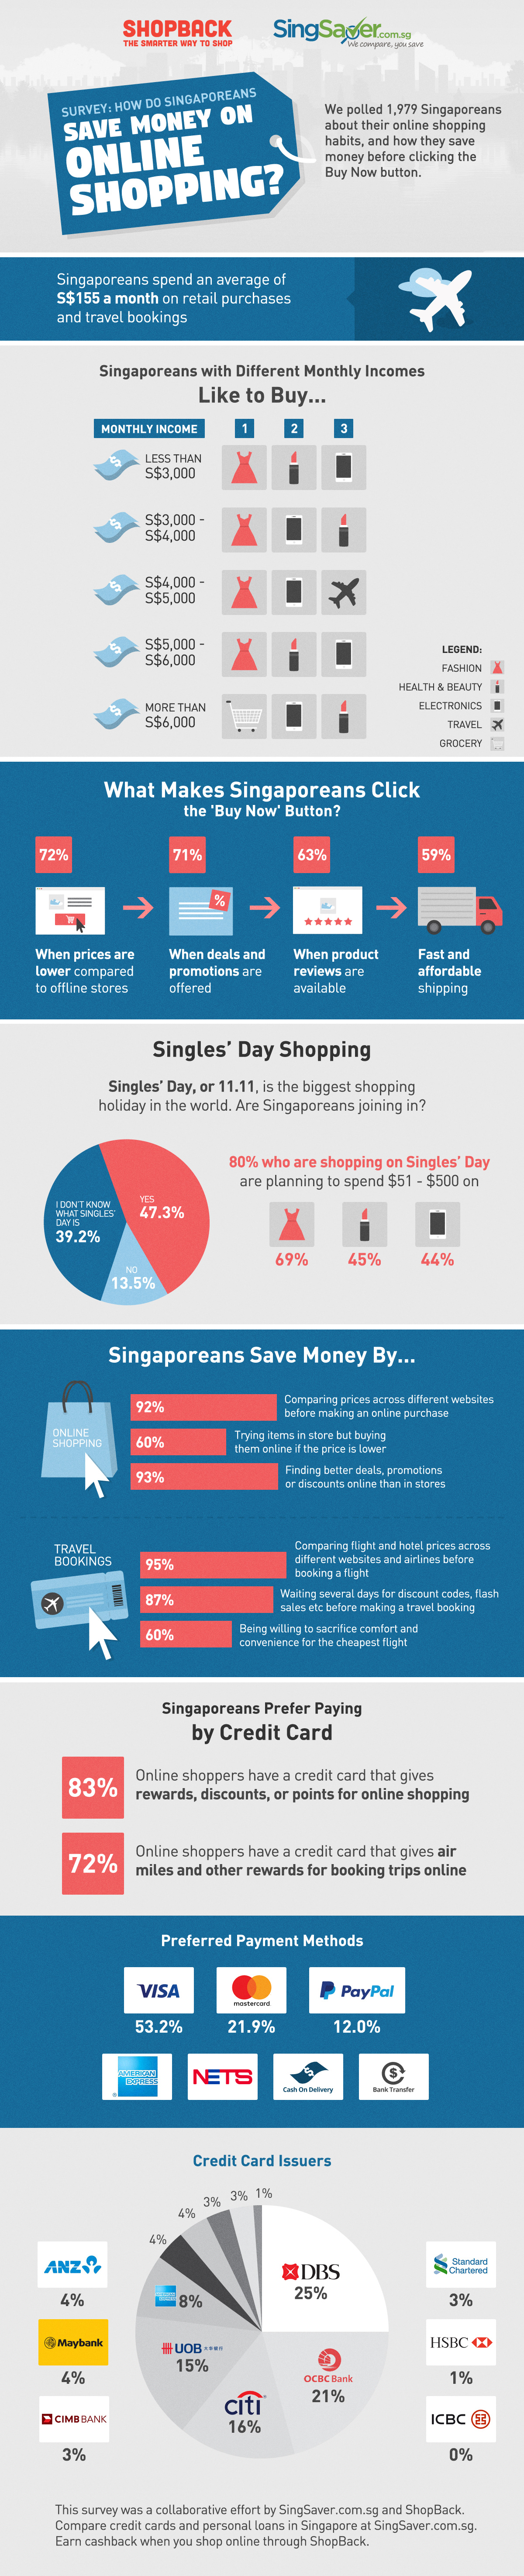 infographic-how-singaporeans-save-money-on-online-shopping